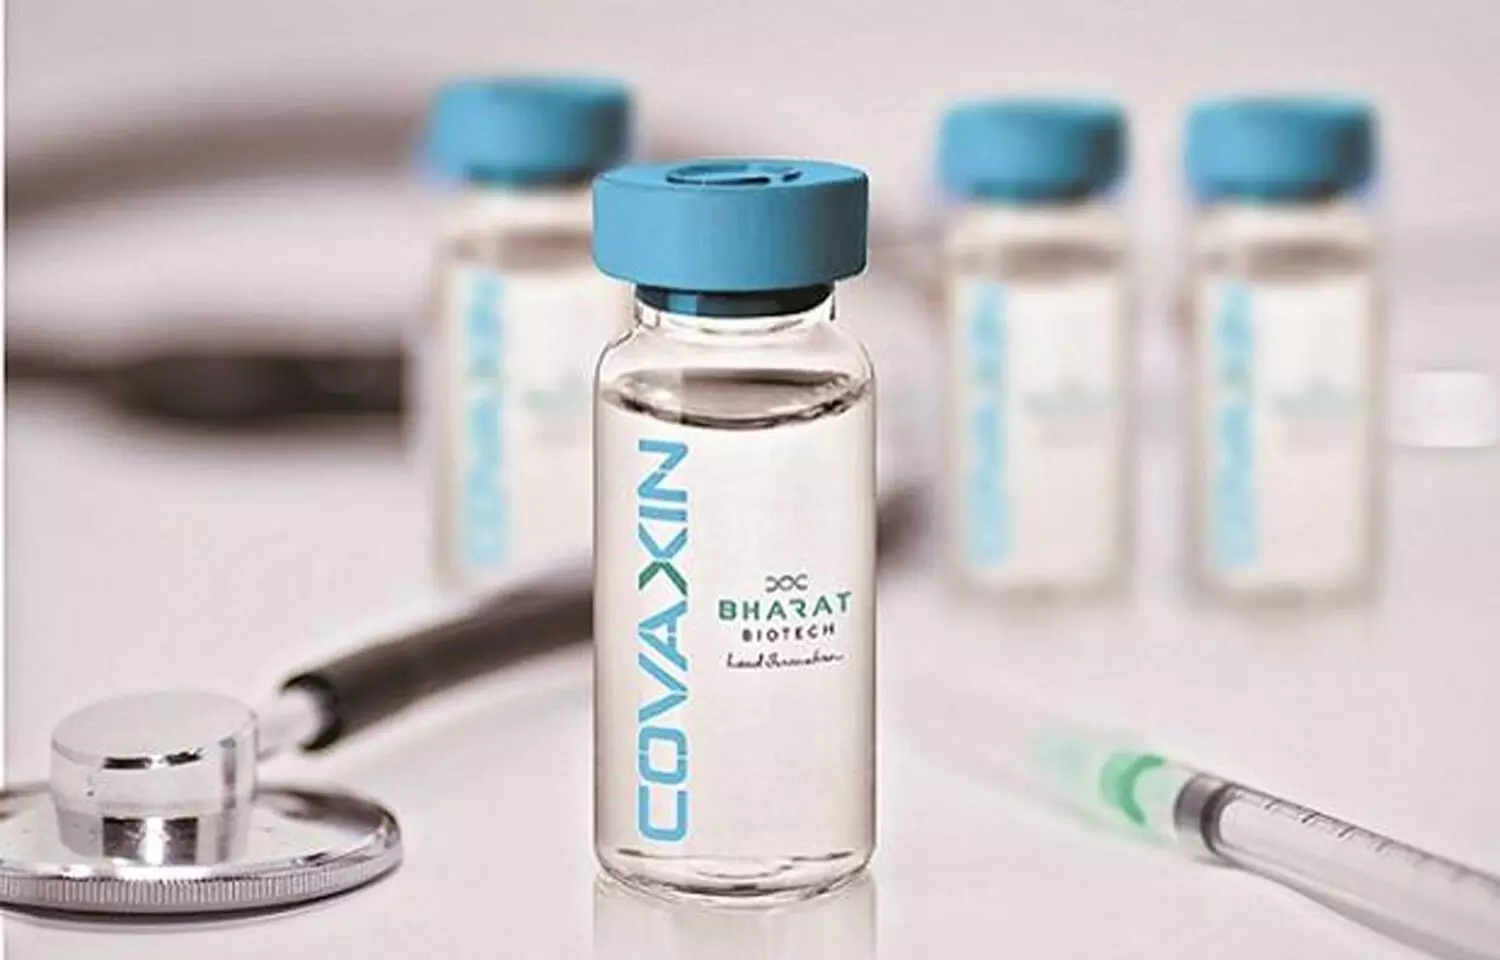 Bharat Biotech says developing Covaxin was big challenge